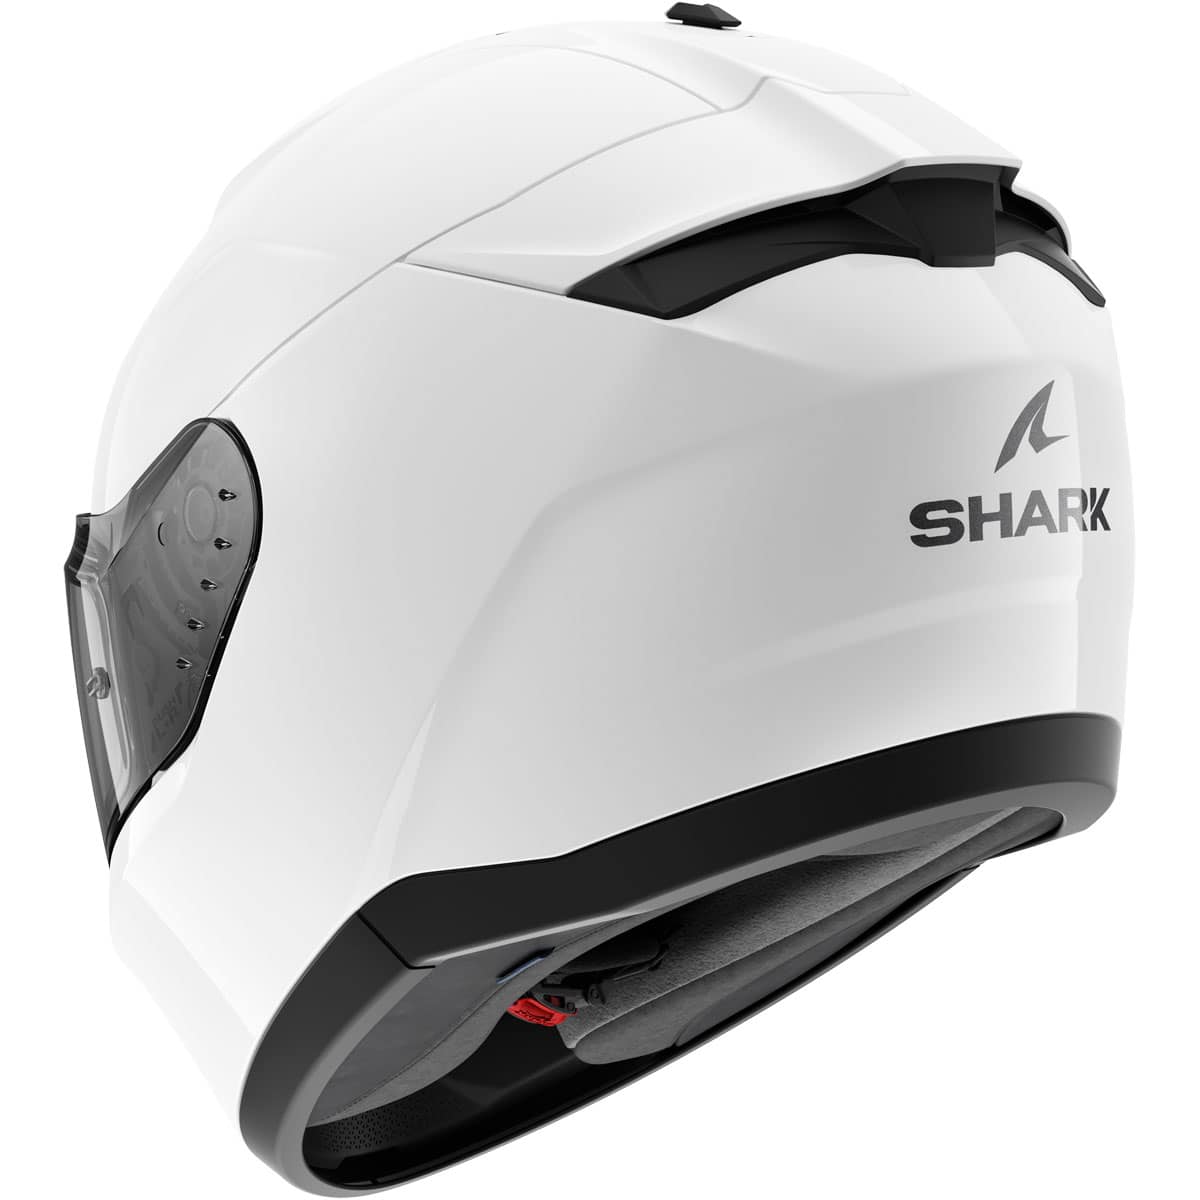 Obtain superior head protection with the Shark Ridill 2 helmet. Featuring all-new design, exceptional features and a streetwear look, including distinctive air inlets